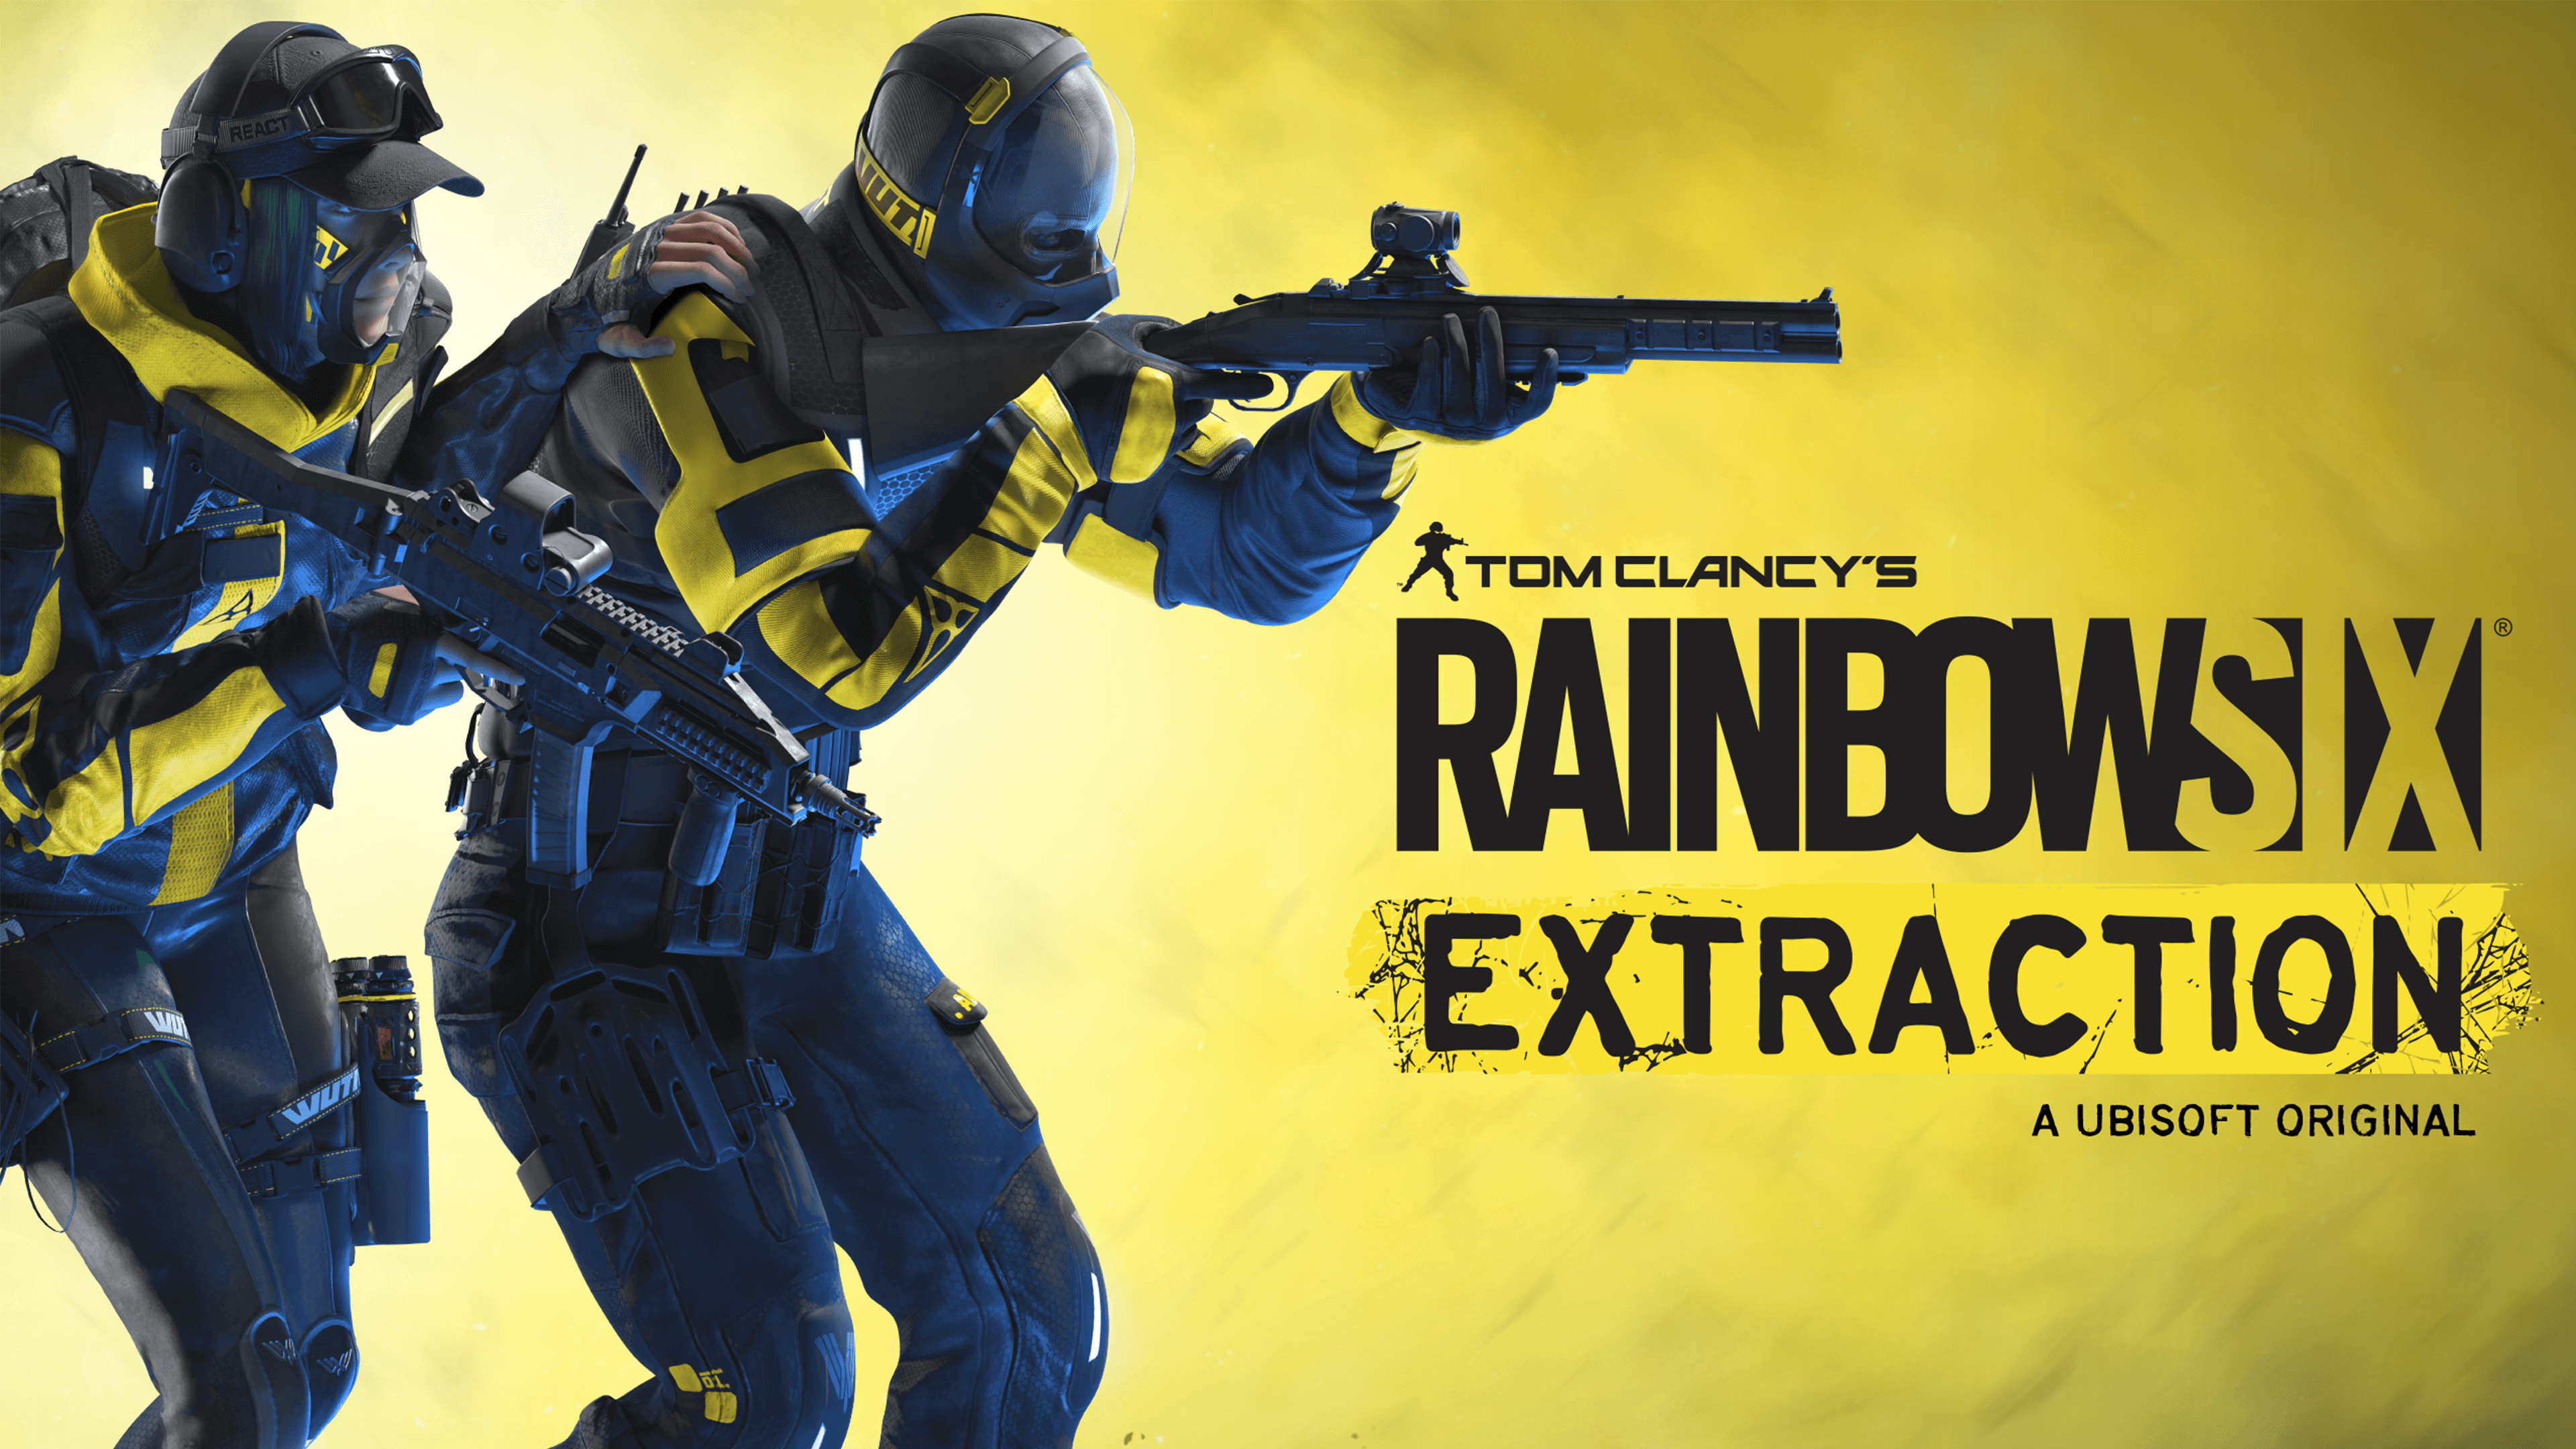 Image for Tom Clancy’s Rainbow Six Extraction slated for January release